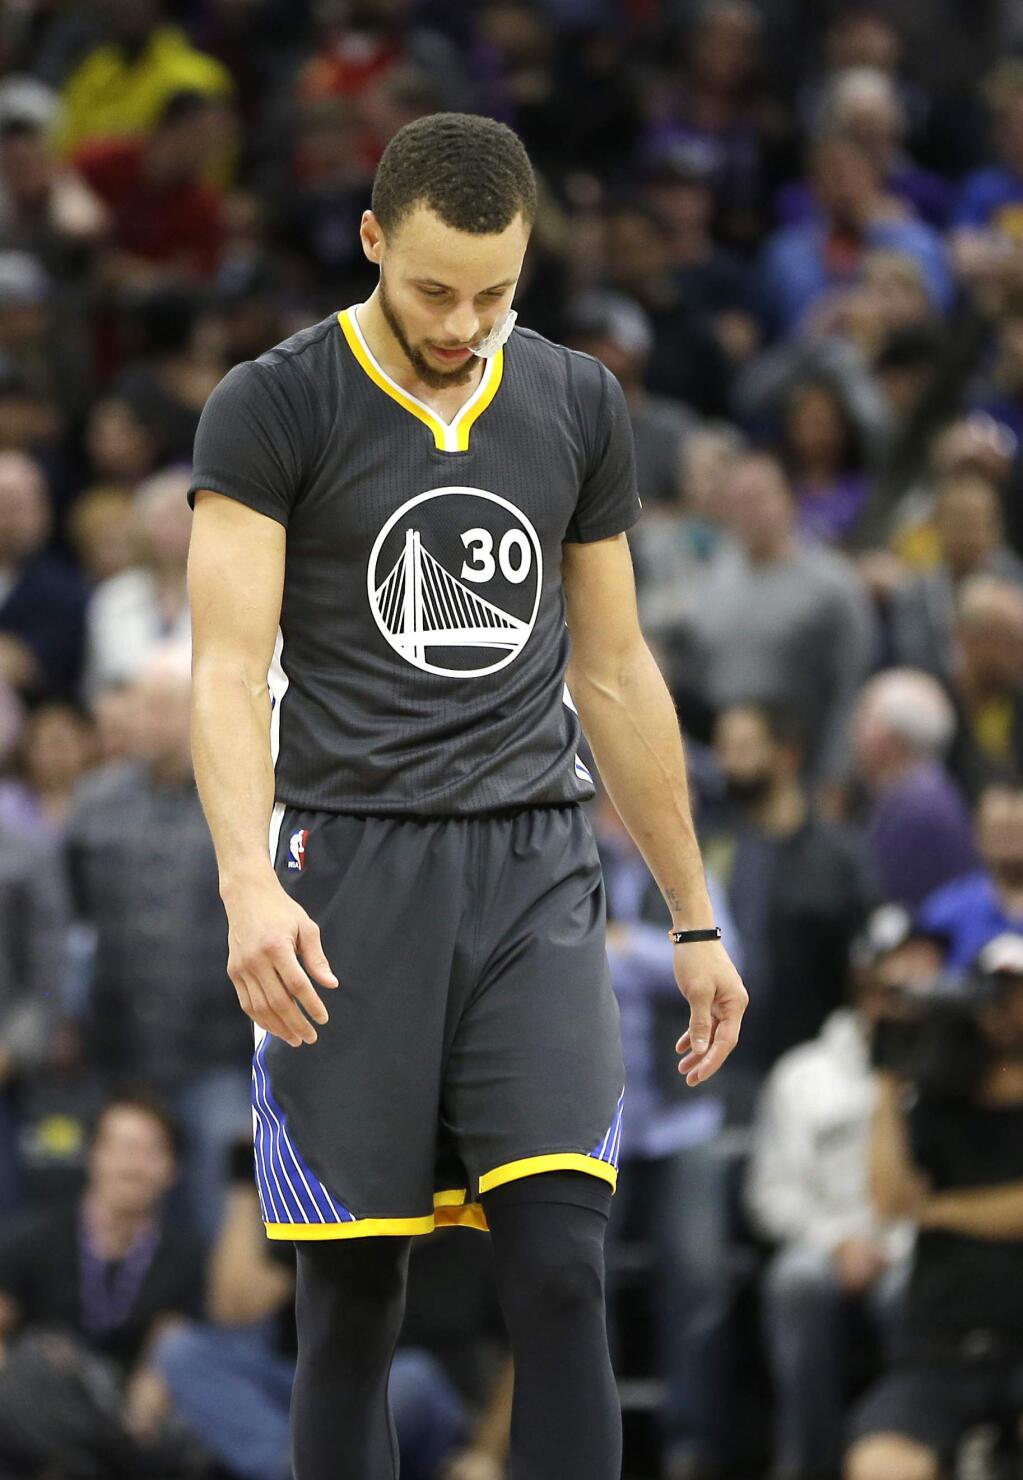 Golden State Warriors guard Stephen Curry walks downcourt in the closing moments of the Warriors 109-106 overtime loss to the Sacramento Kings in an NBA basketball game in Sacramento, Calif., Saturday, Feb. 4, 2017. (AP Photo/Rich Pedroncelli)